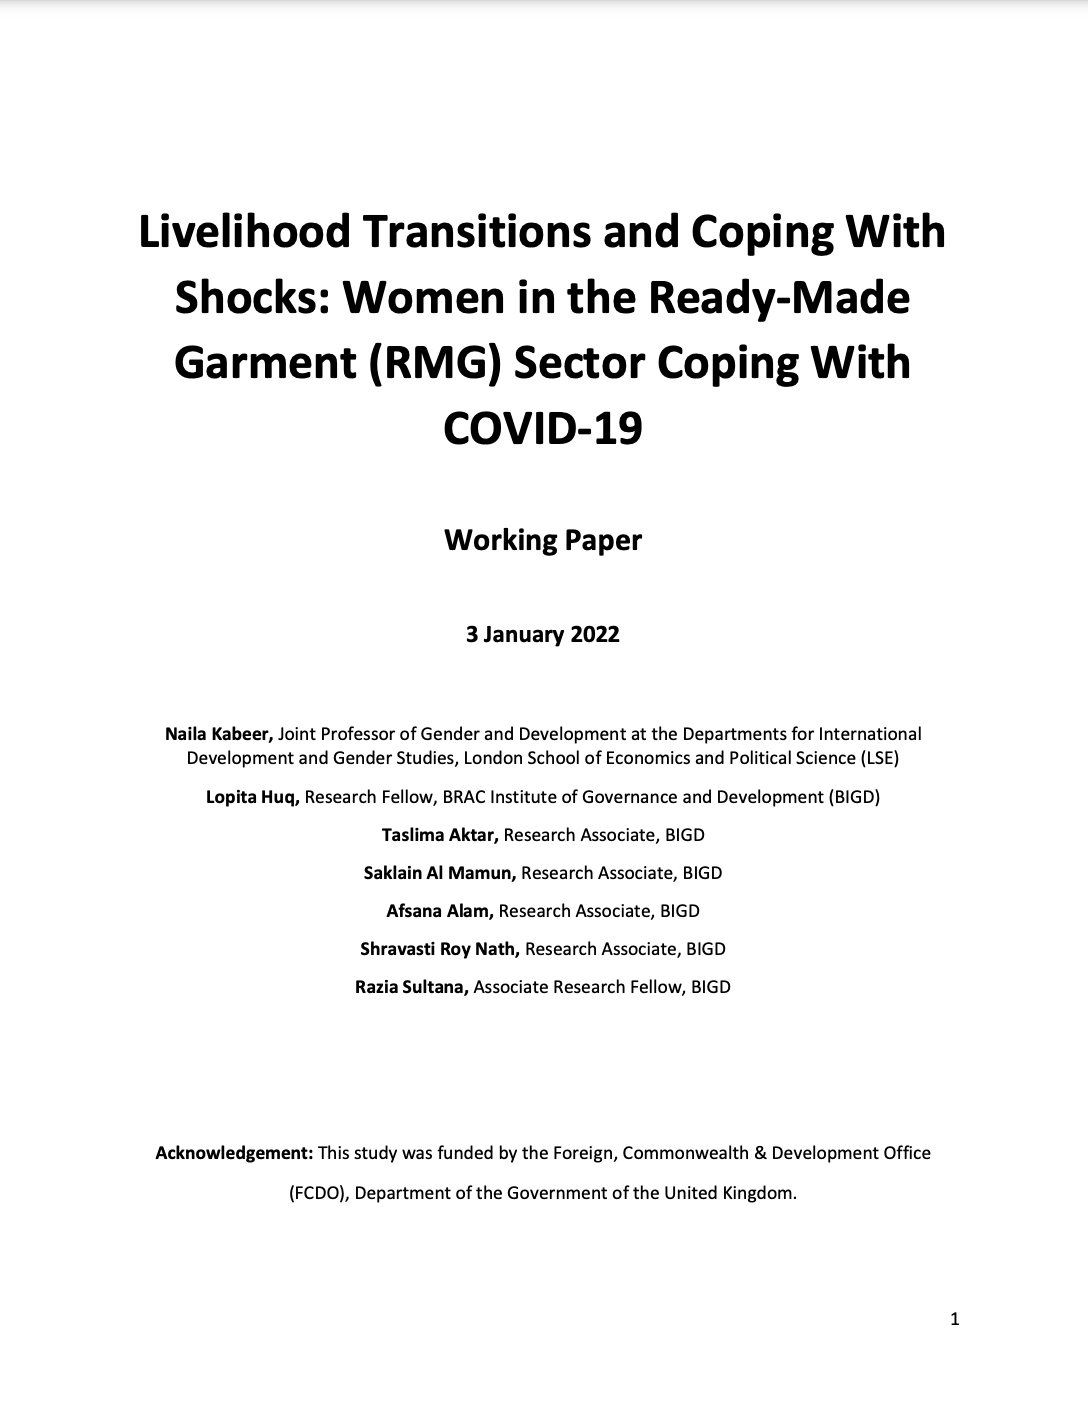 Livelihood Transitions and Coping With Shocks: Women in the Ready-Made Garment (RMG) Sector Coping With COVID-19